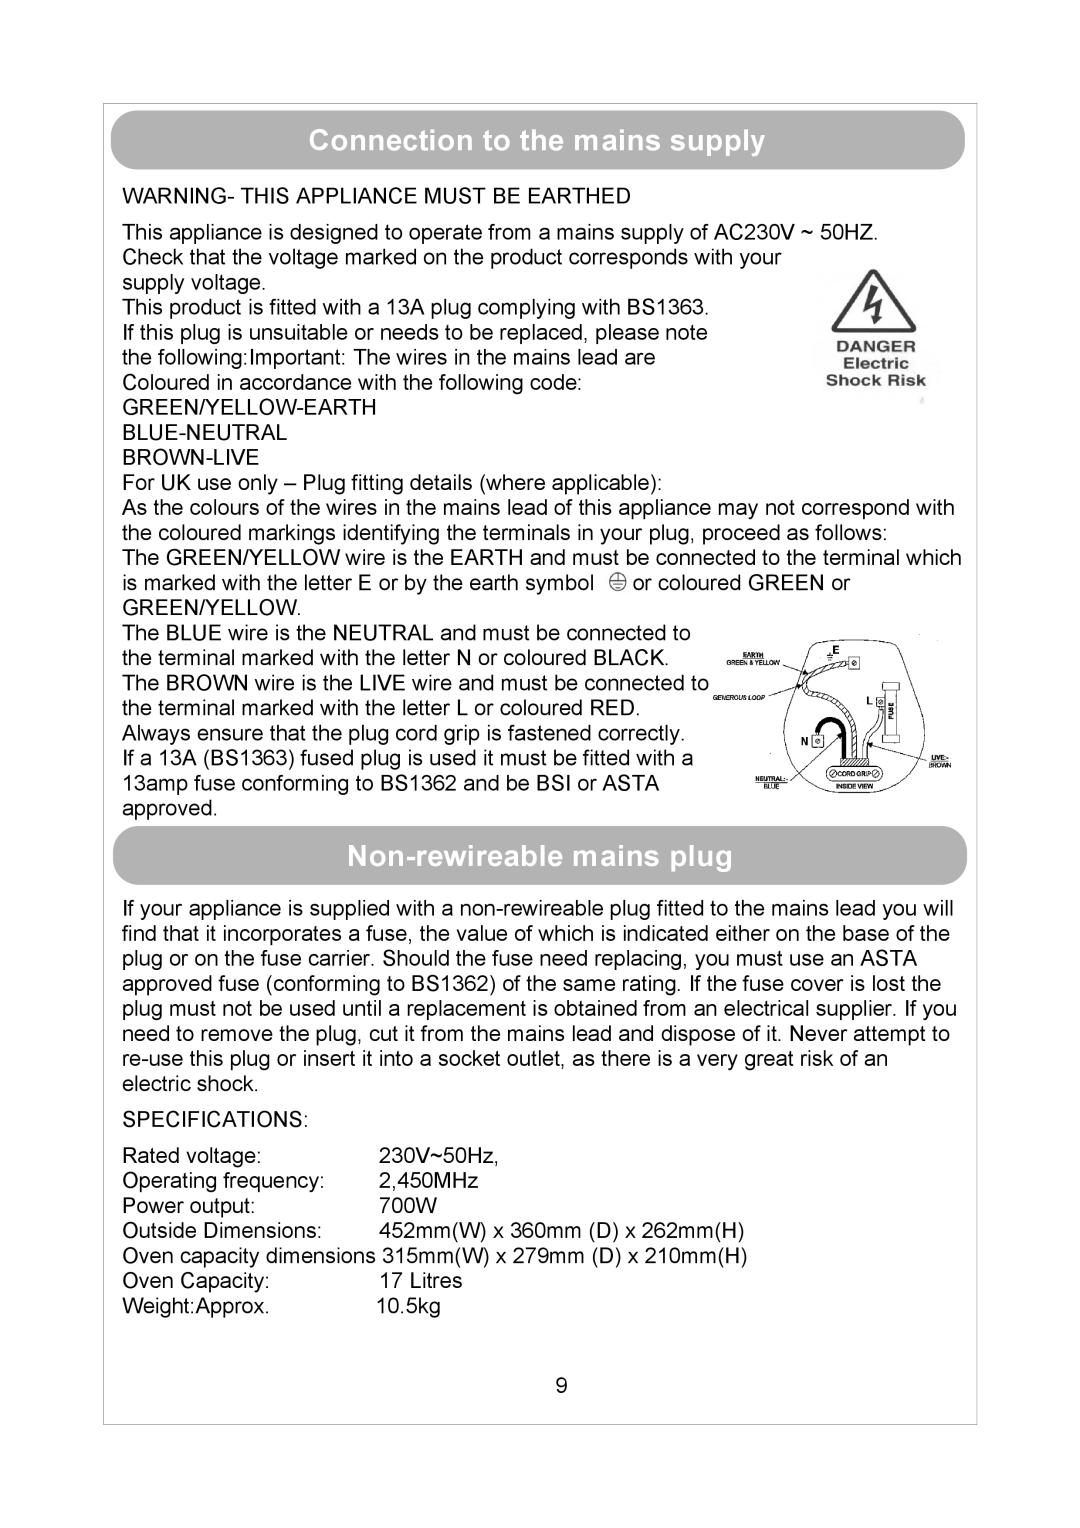 Russell Hobbs RHM1709S user manual Connection to the mains supply, Non-rewireablemains plug 